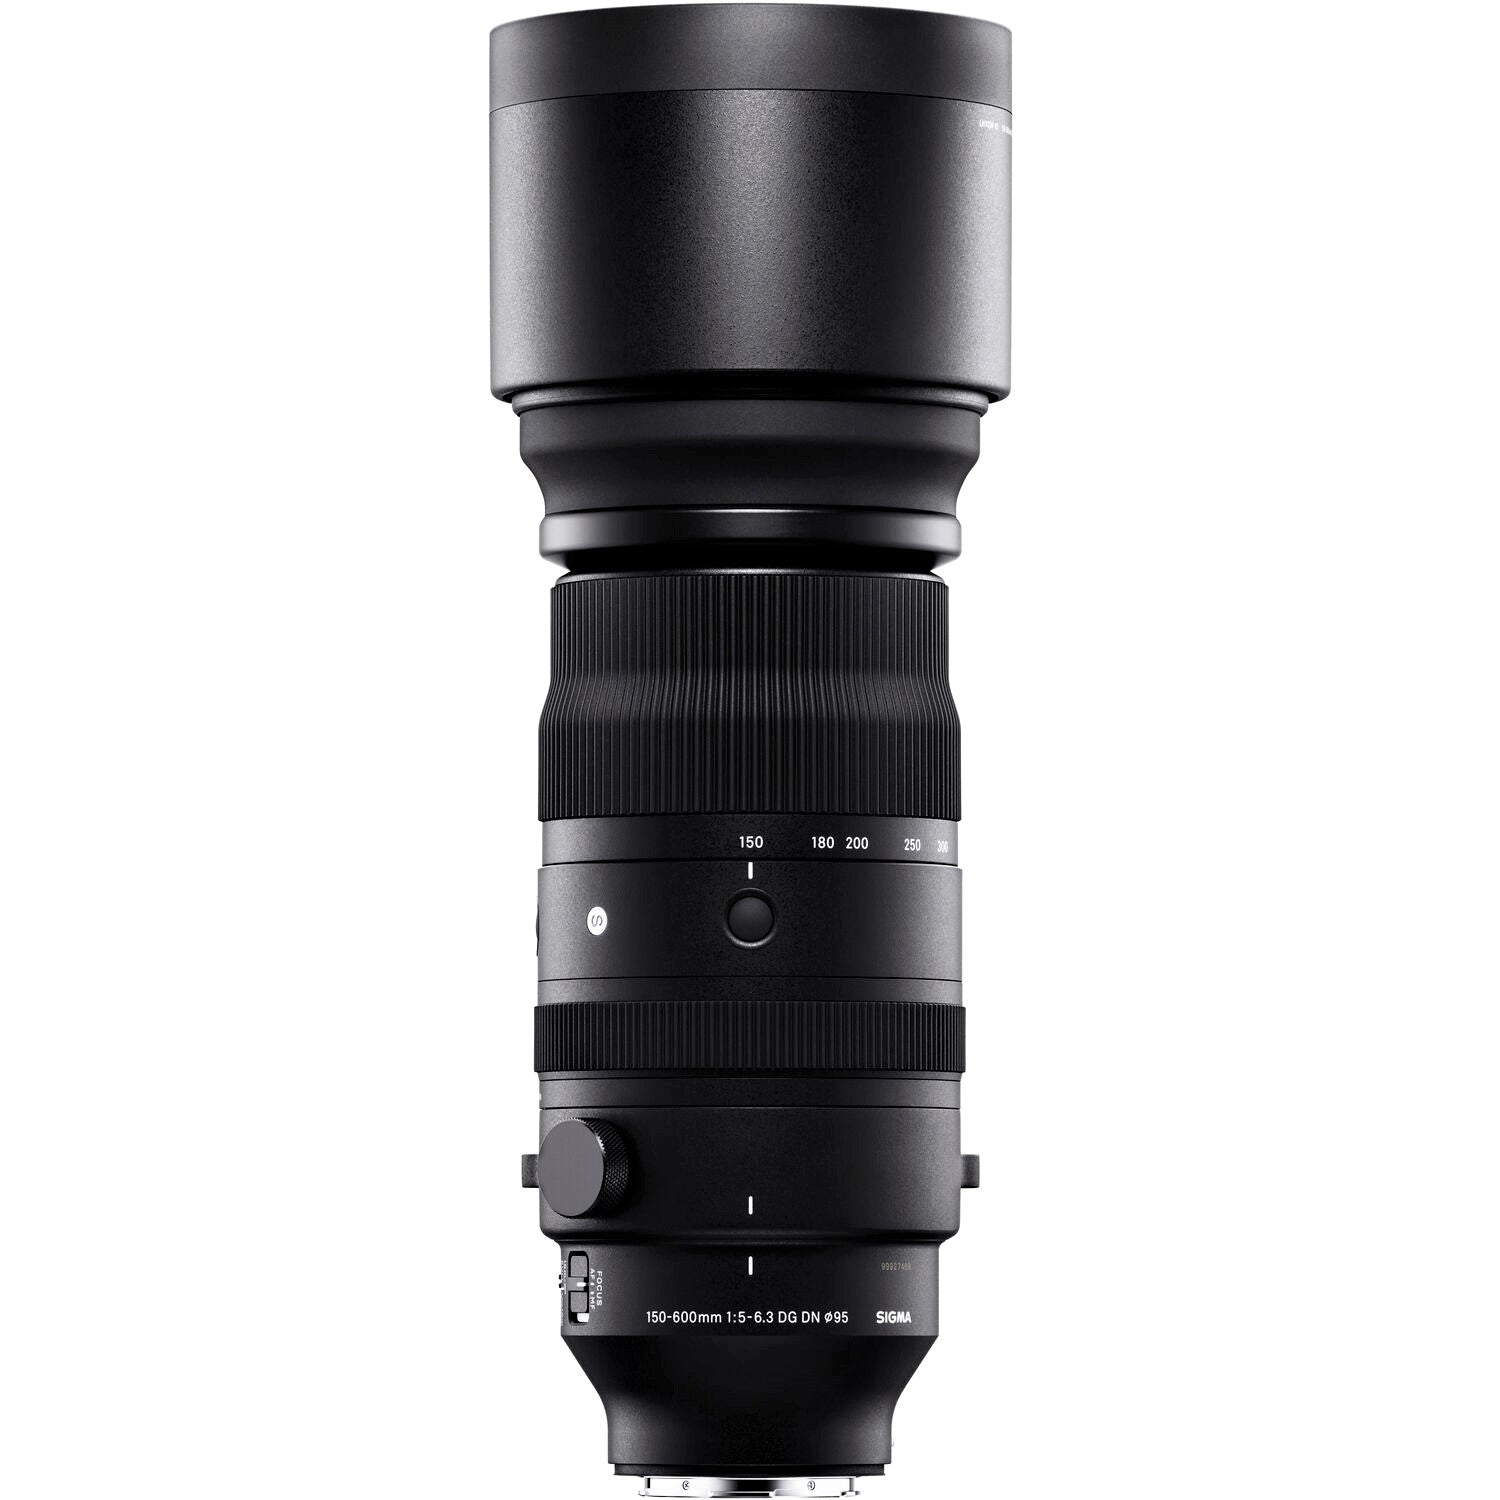 Sigma 150-600mm F5-6.3 DG DN OS Sports Lens (Sony E Mount) with Attached Lens Hood on the Top